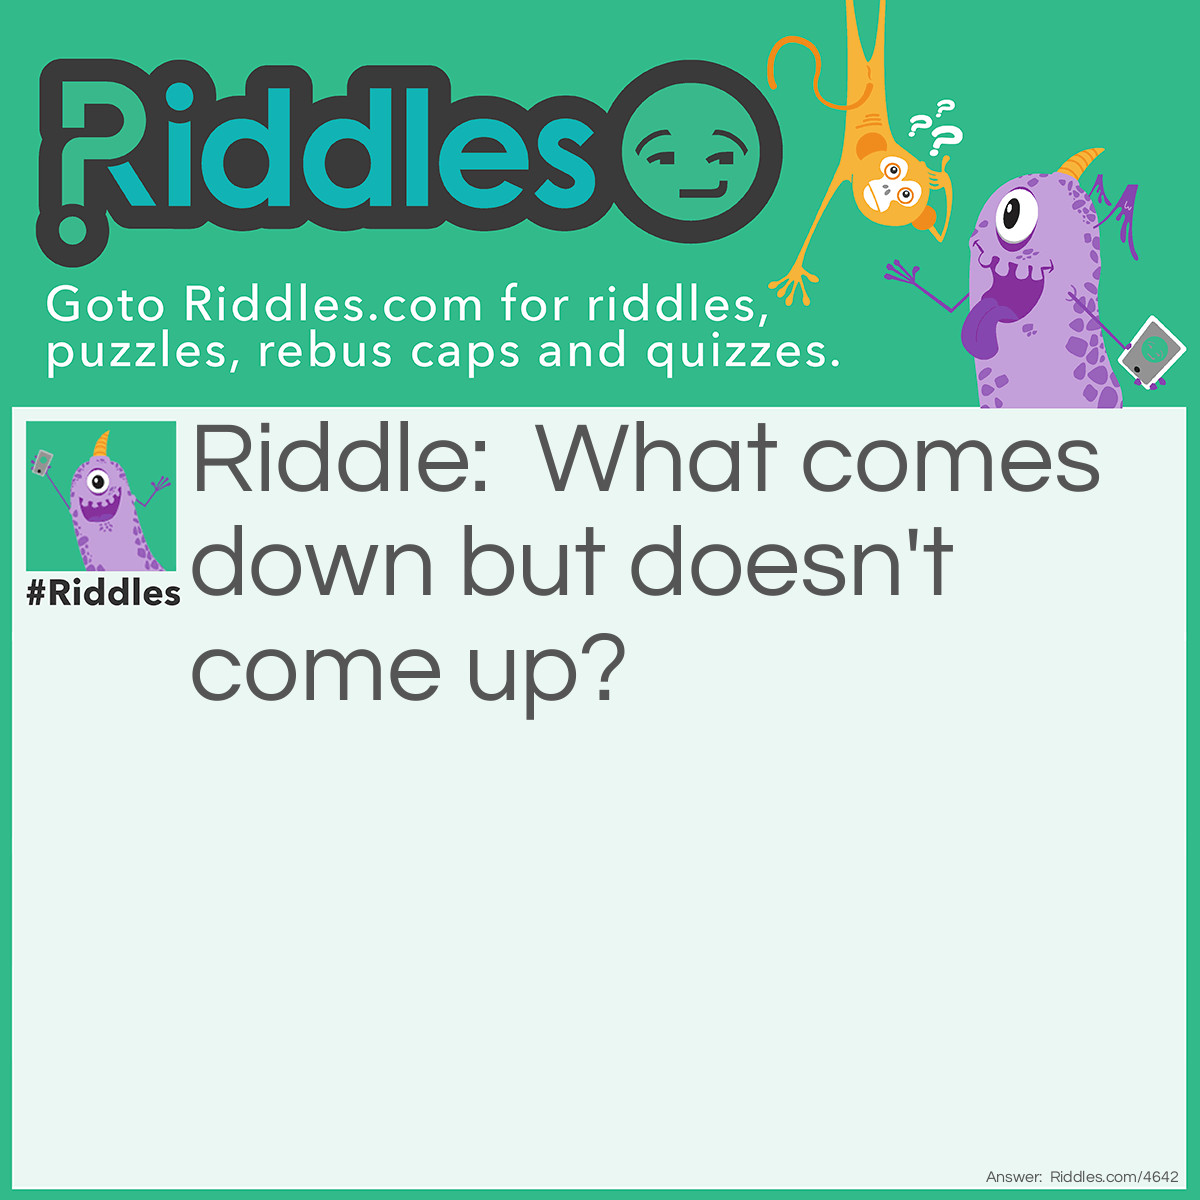 Riddle: What comes down but doesn't come up? Answer: Rain.